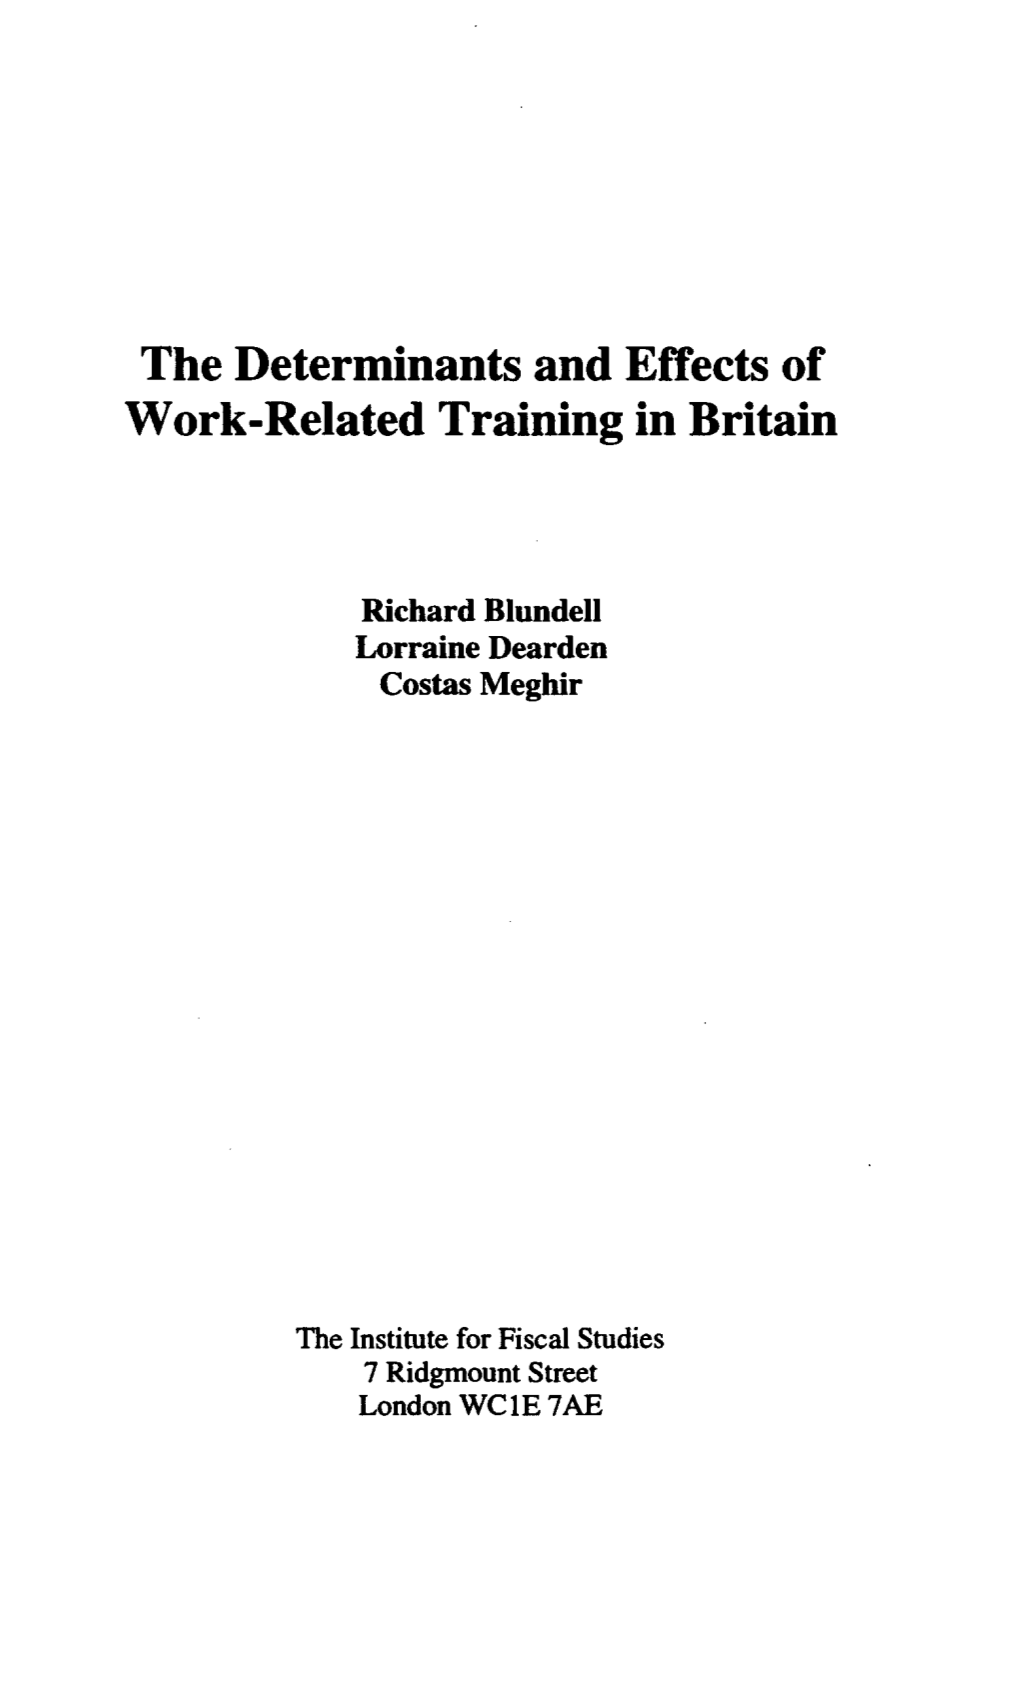 The Determinants and Effects of Work-Related Training in Britain